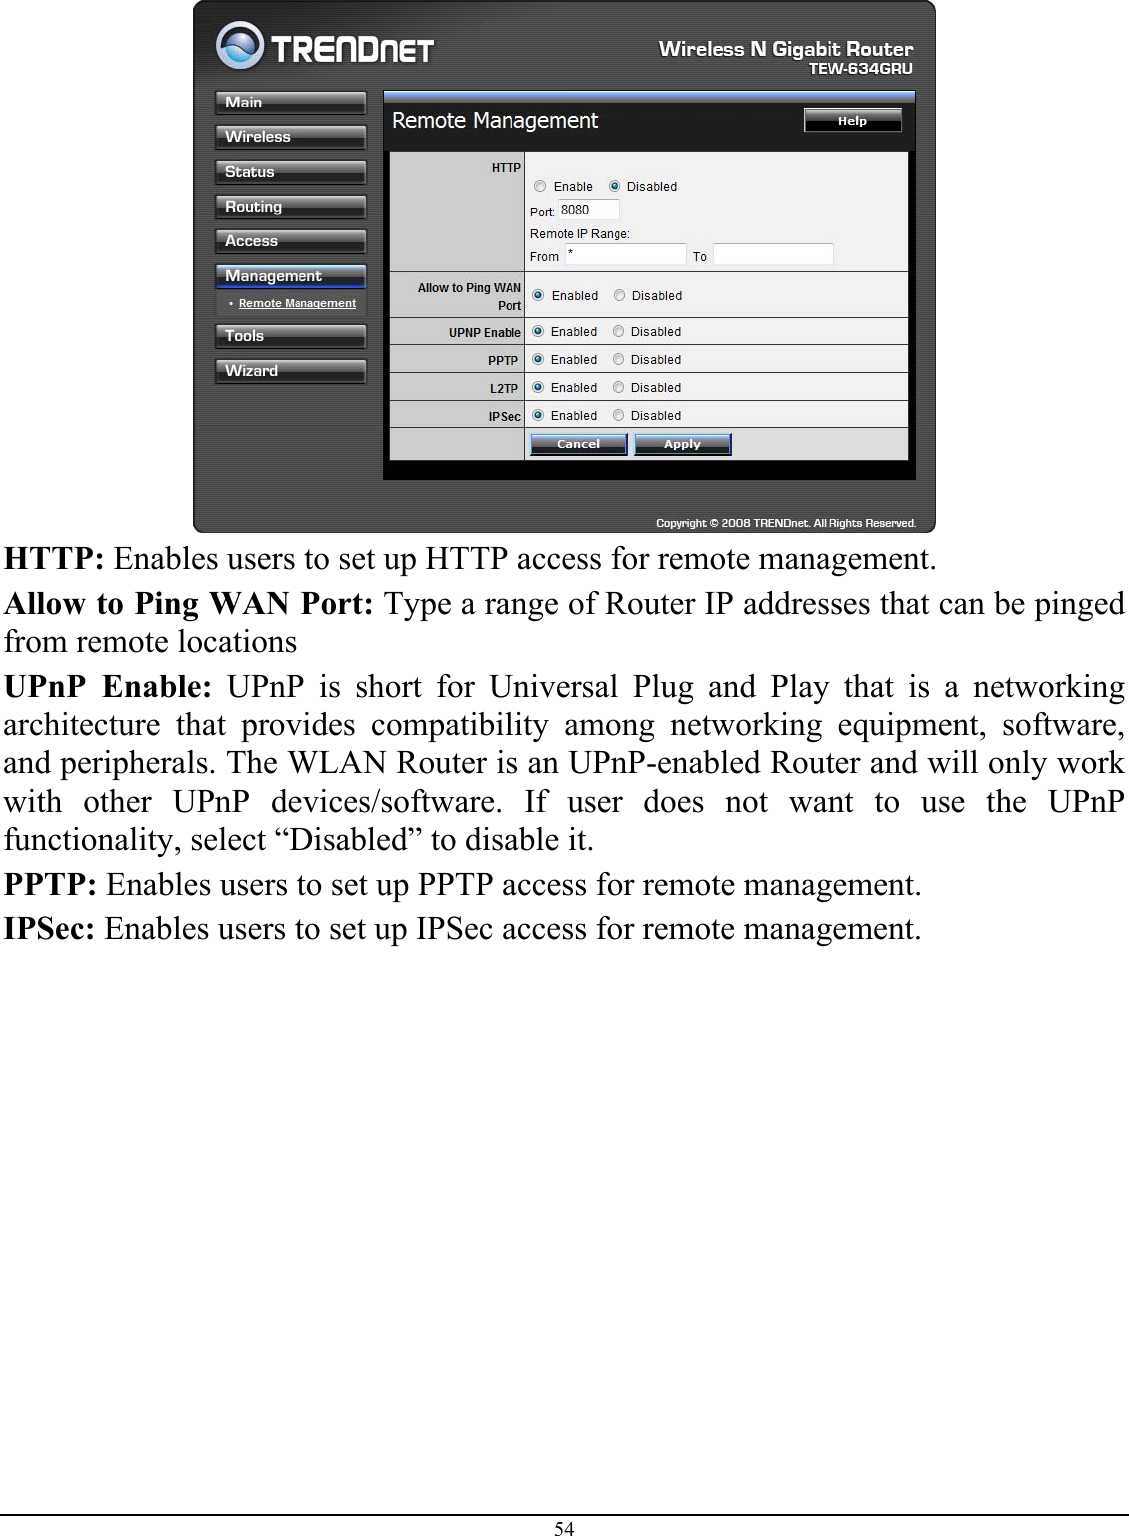 54   HTTP: Enables users to set up HTTP access for remote management. Allow to Ping WAN Port: Type a range of Router IP addresses that can be pinged from remote locations UPnP Enable: UPnP is short for Universal Plug and Play that is a networking architecture that provides compatibility among networking equipment, software, and peripherals. The WLAN Router is an UPnP-enabled Router and will only work with other UPnP devices/software. If user does not want to use the UPnP functionality, select “Disabled” to disable it. PPTP: Enables users to set up PPTP access for remote management. IPSec: Enables users to set up IPSec access for remote management.          